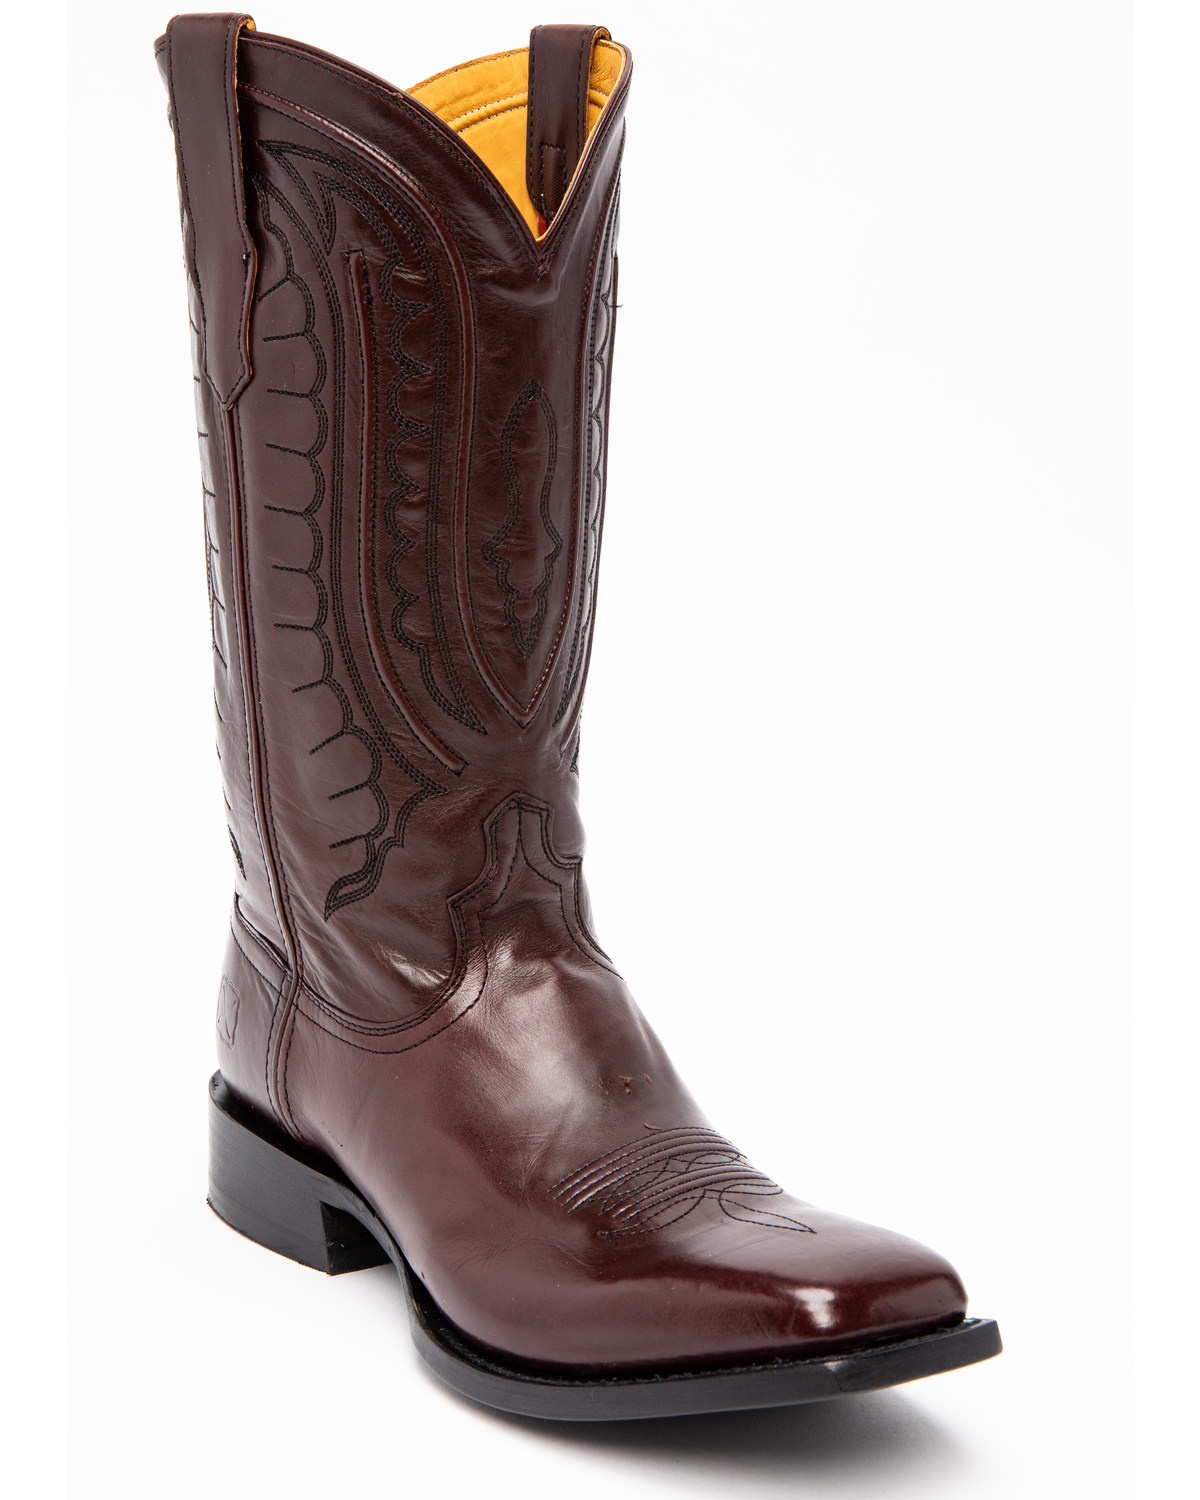 Twisted X Men's Rancher Western Boots - Square Toe